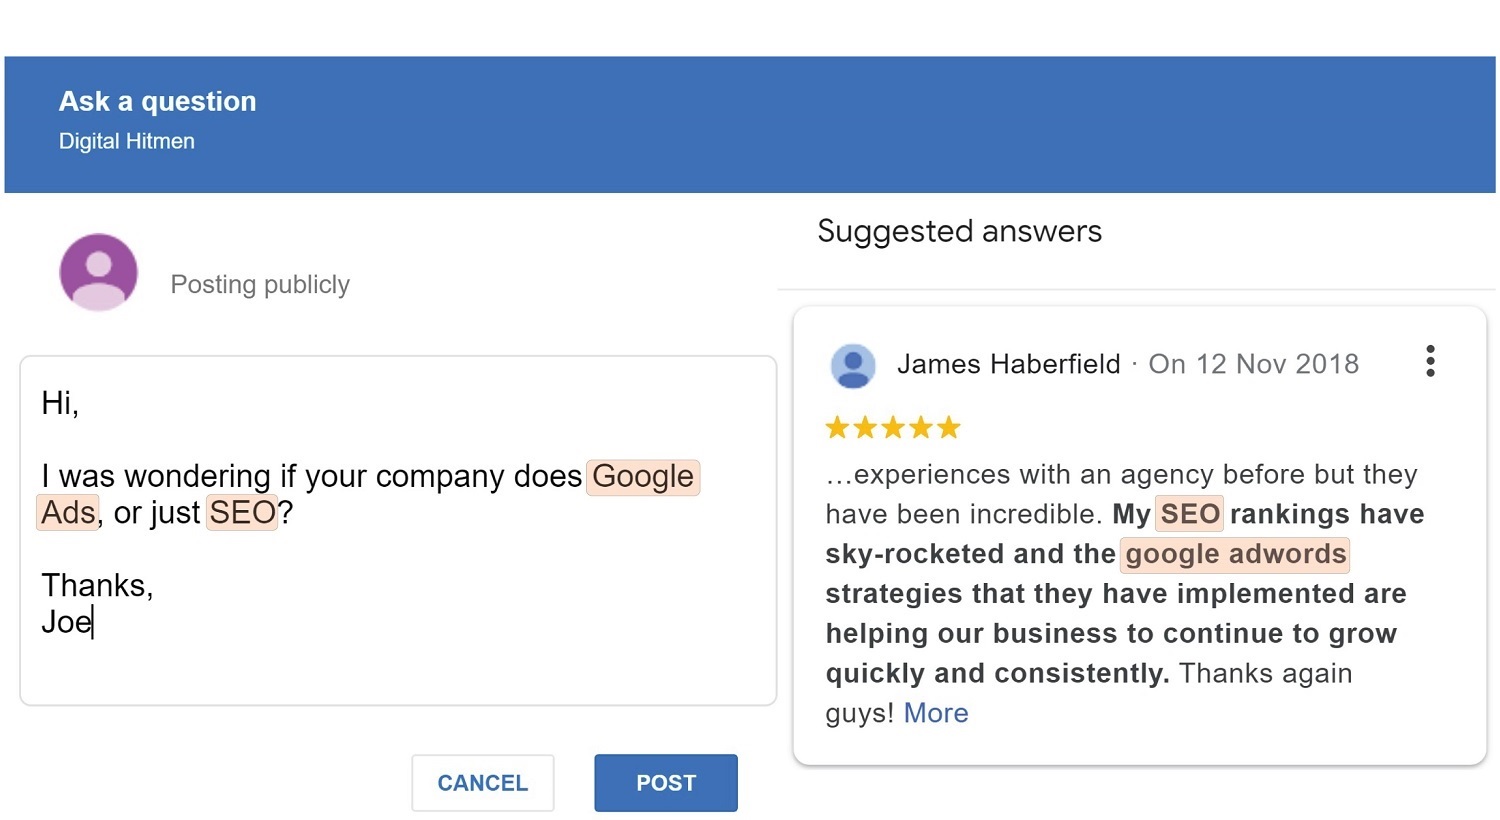 A Google My Business customer asks a direction question to the business owner